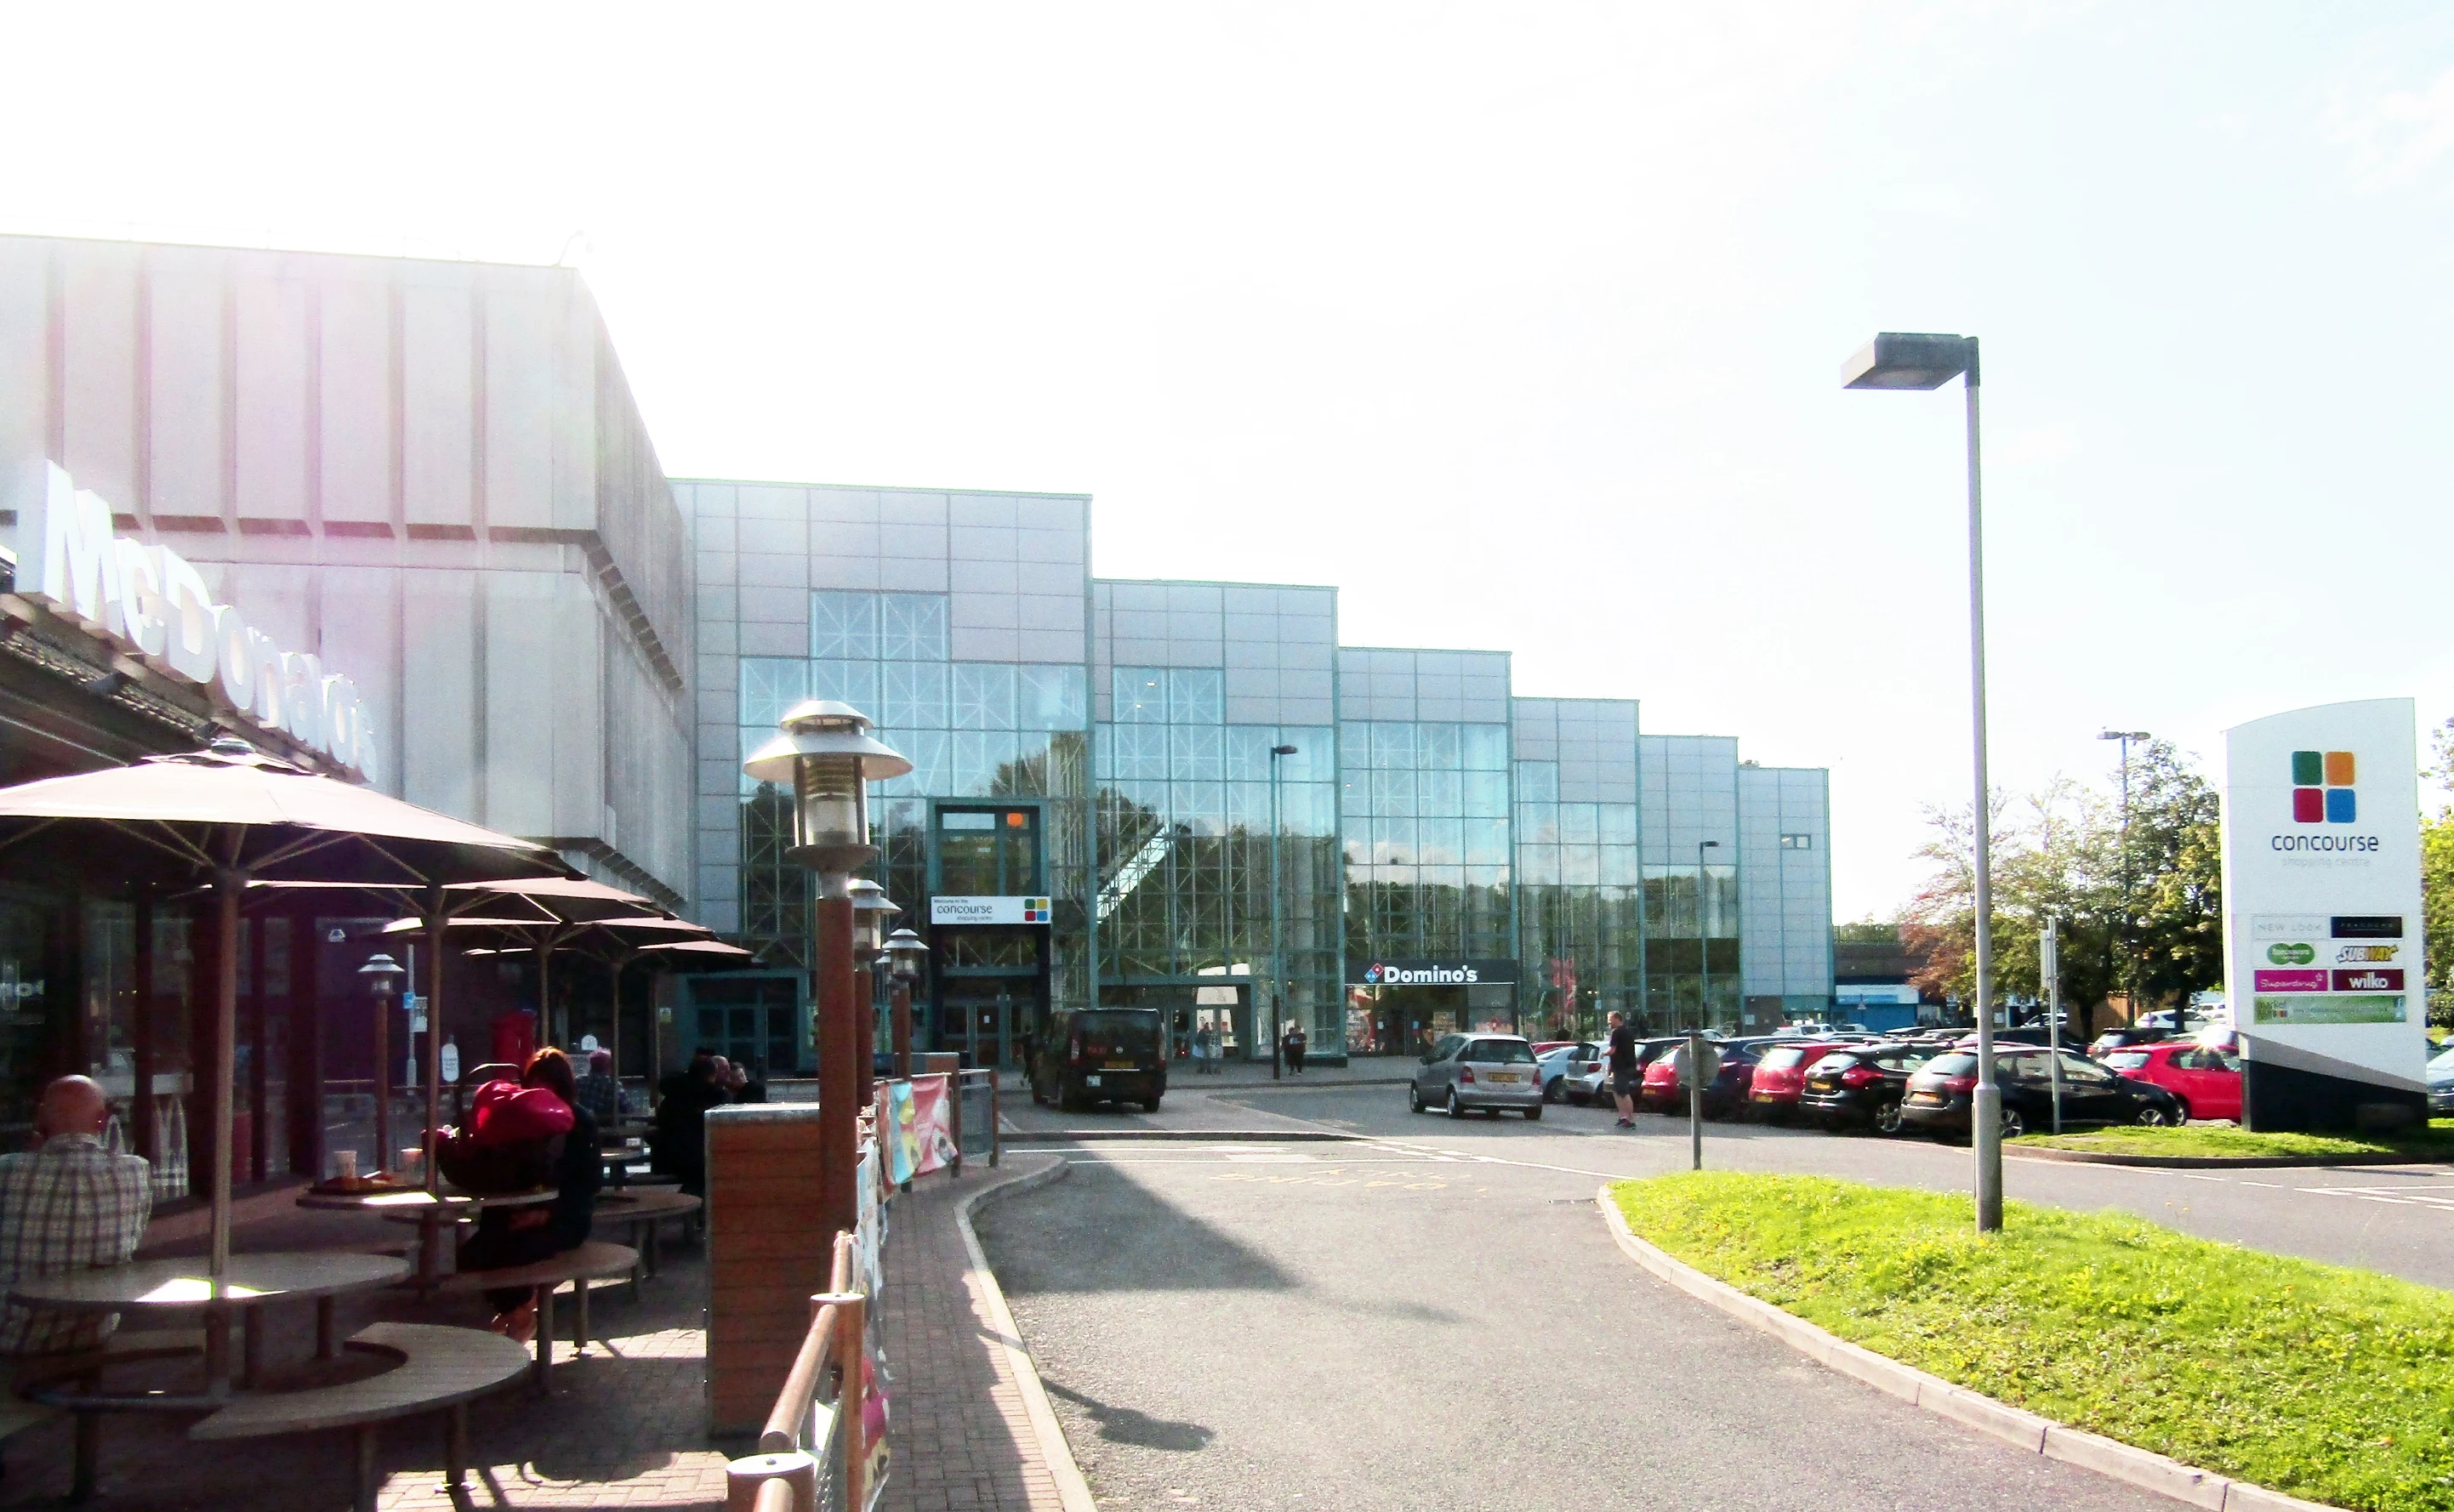 The Concourse Shopping Centre in Skelmersdale